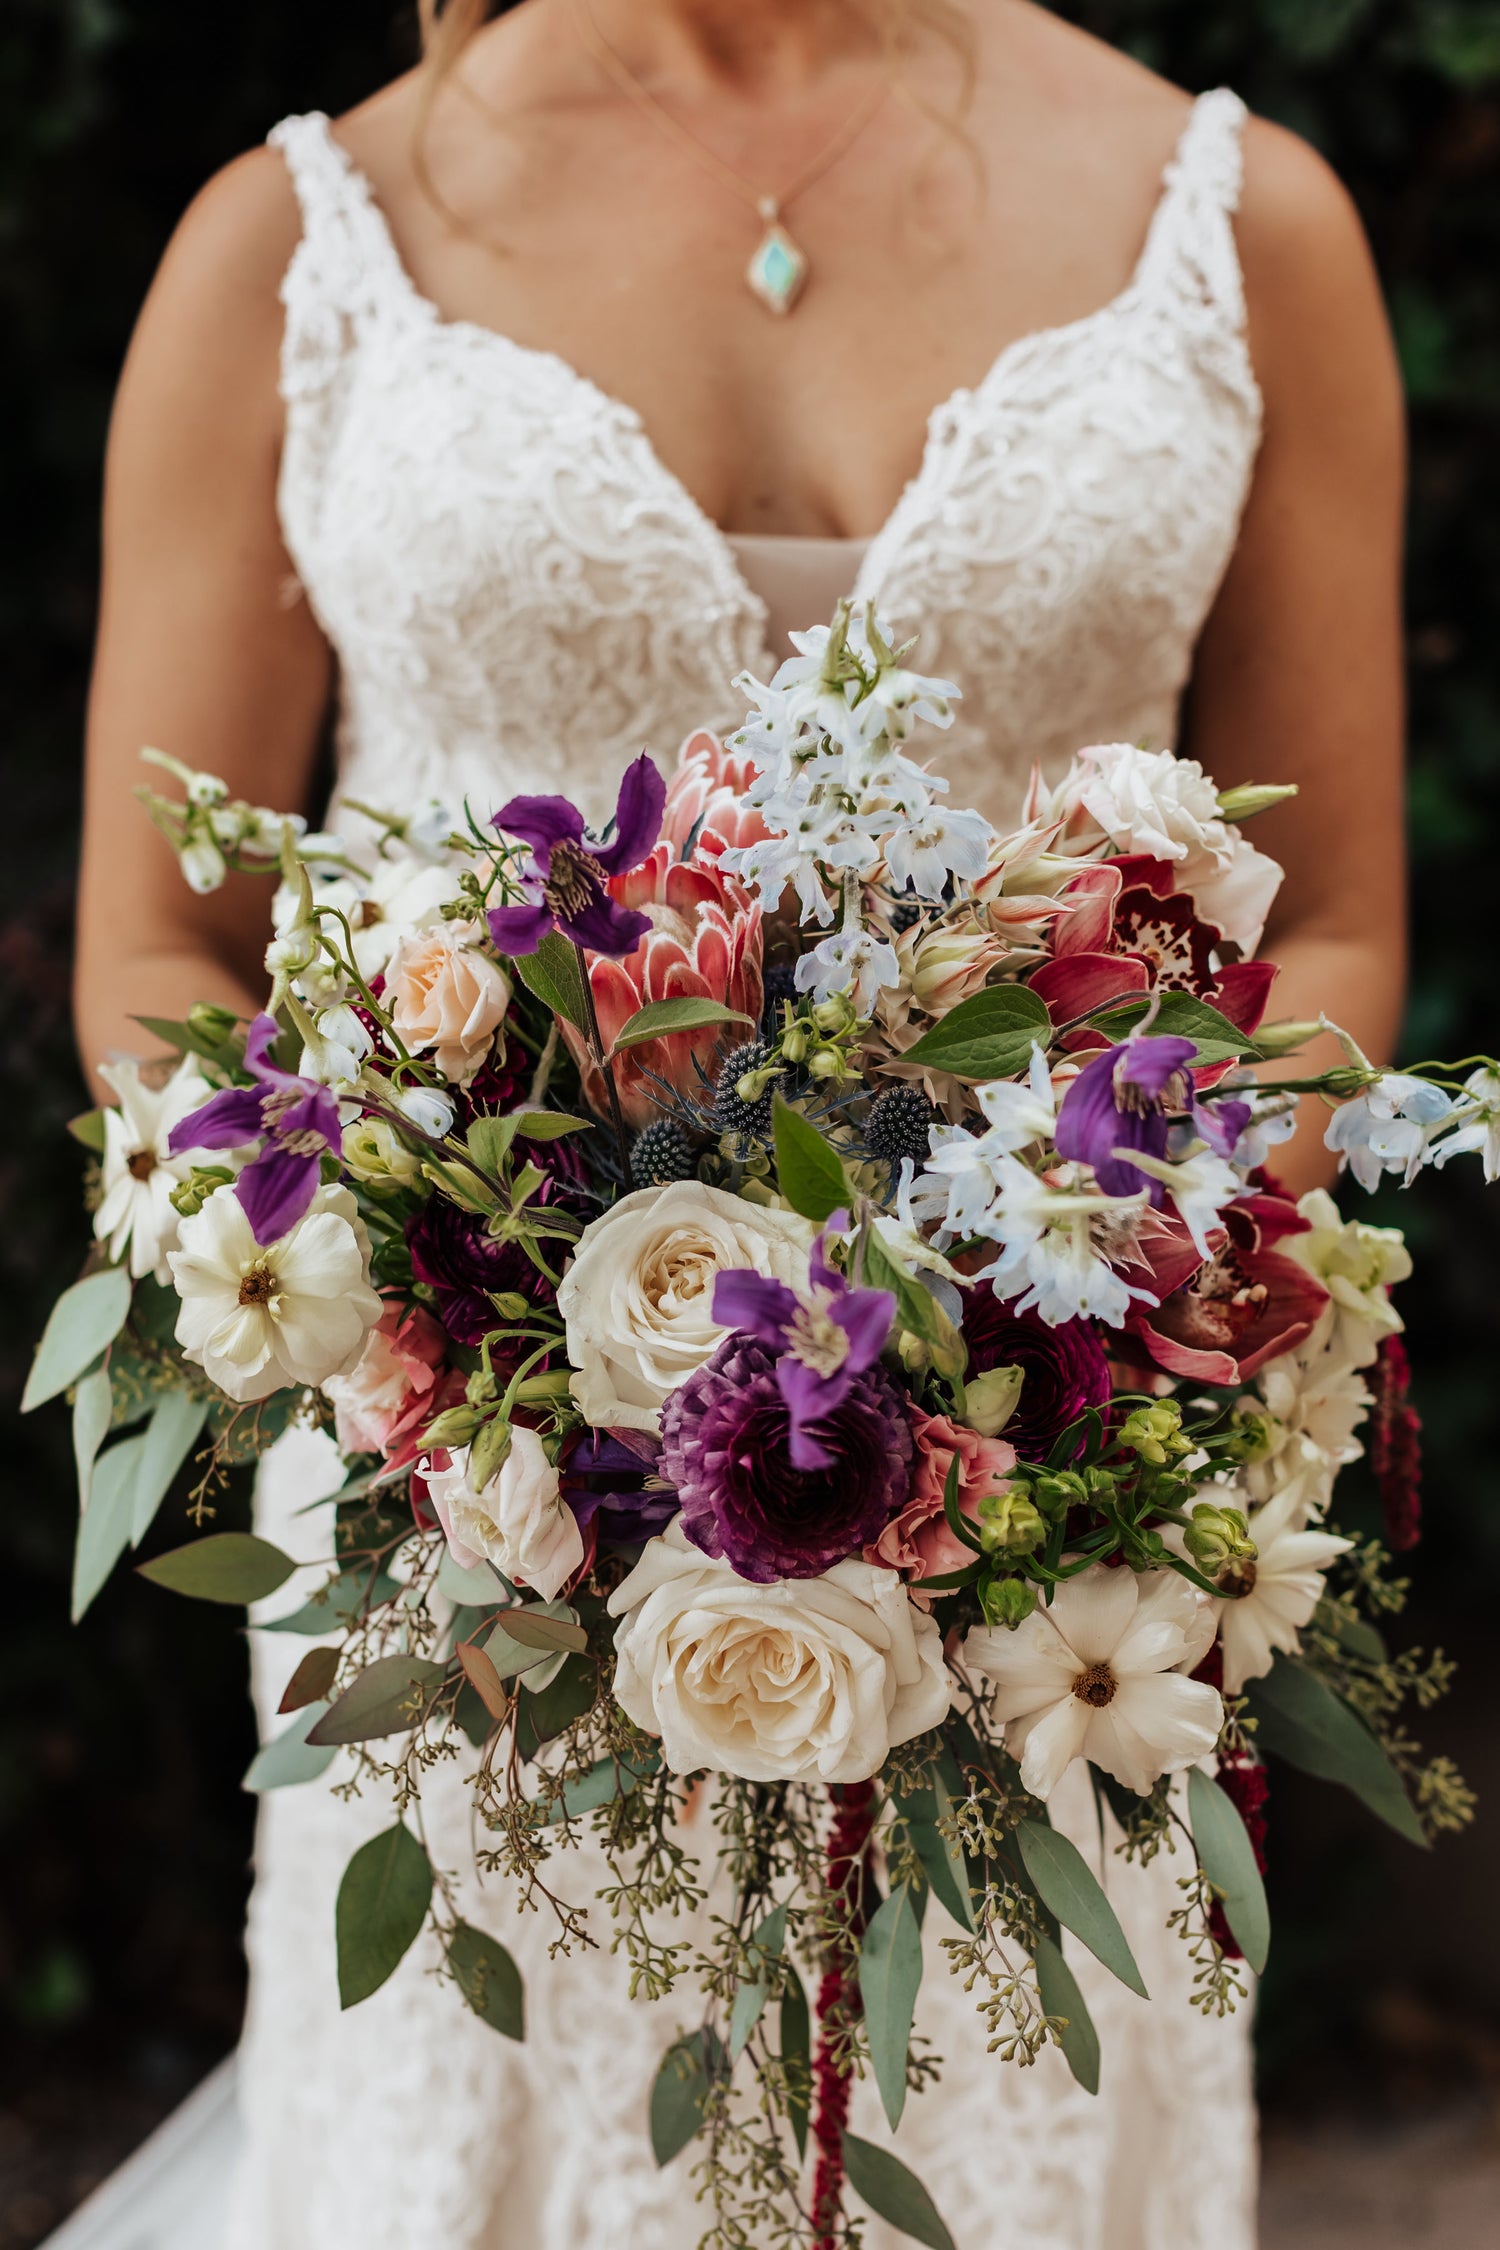 Artichokes & Pomegranates designed bridal bouquet with pink ice protea, butterfly ranunculus, delphinium, roses, cymbidium orchid, blushing bride protea, clematis and lisianthus.